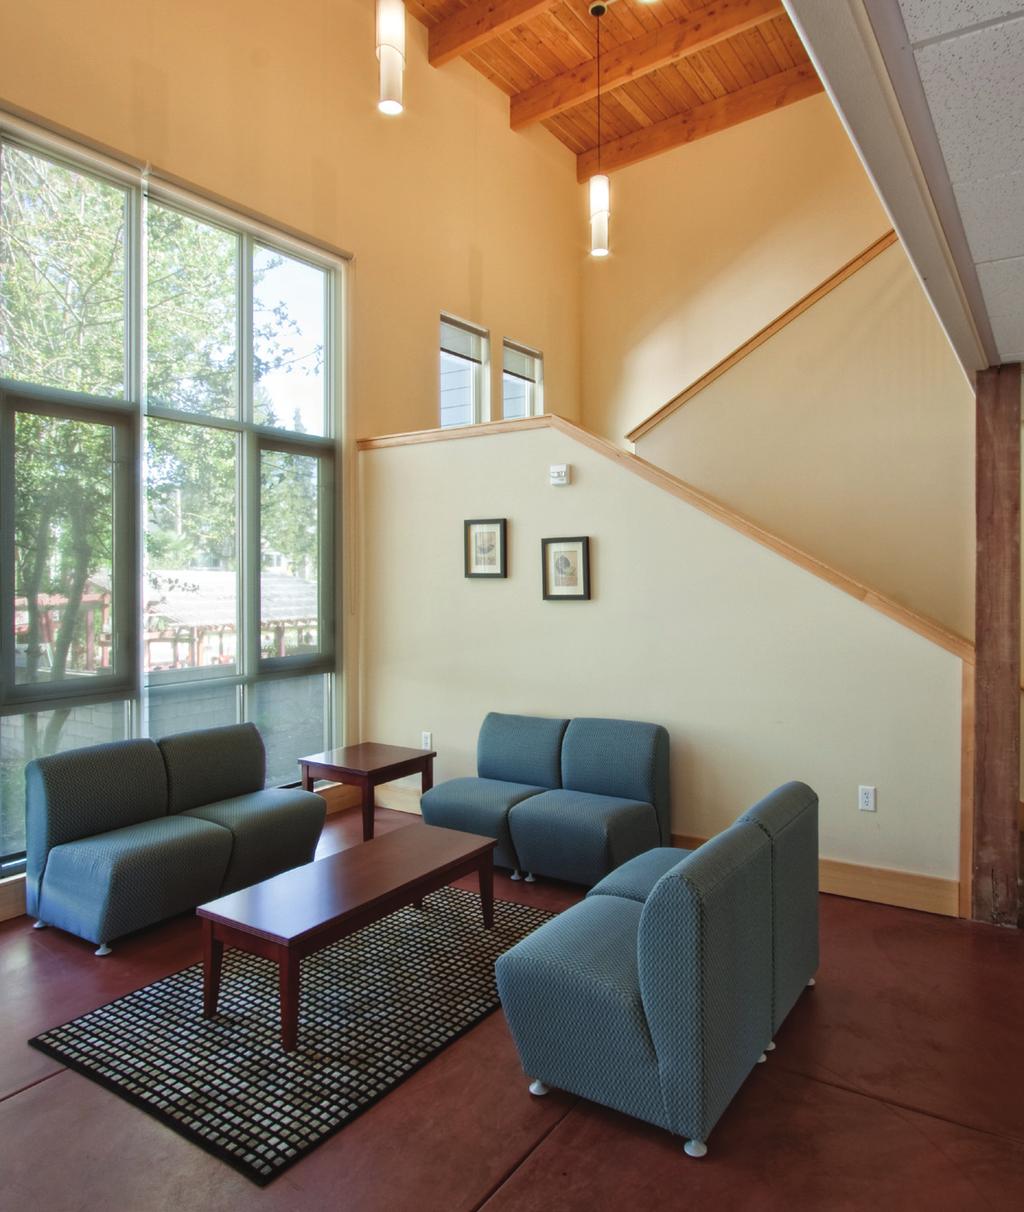 KENYON HOUSE SEATTLE, WASHINGTON Developed through a collaborative partnership between Building Changes, the Housing Resources Group and Sound Mental Health, Kenyon House is an 18-unit residence